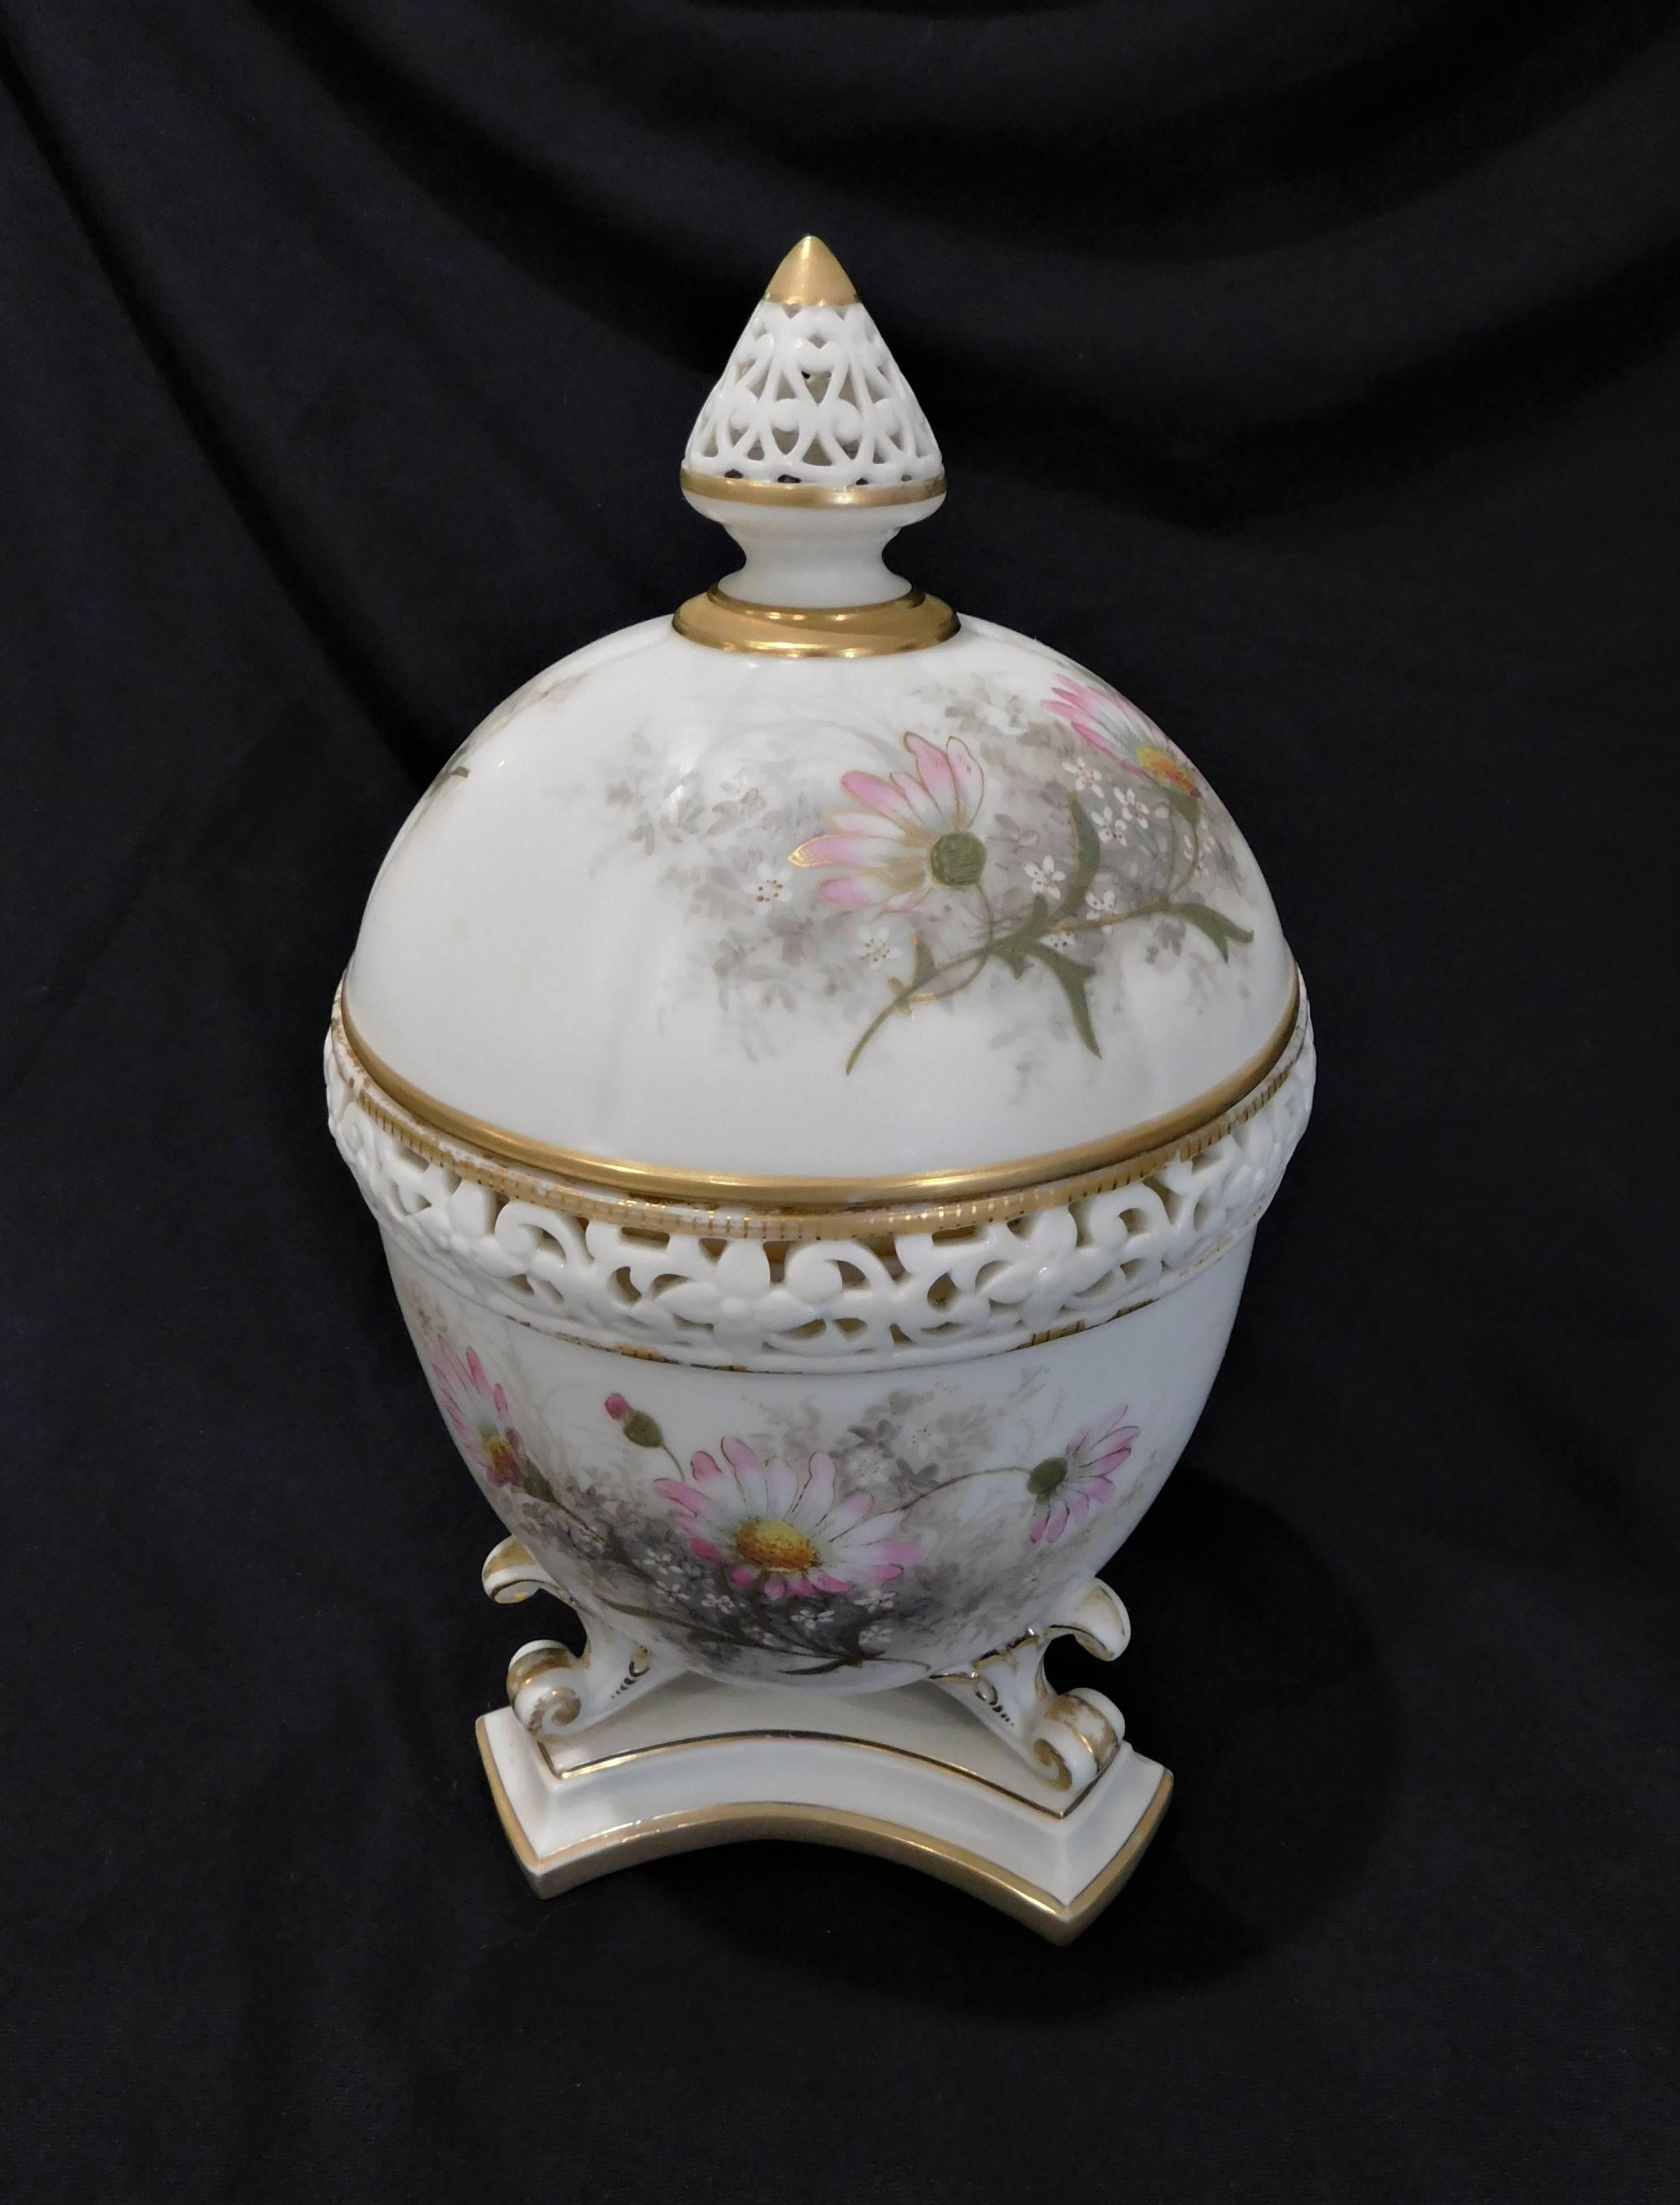 Royal Worcester Lidded Potpourri Porcelain Jar with Lid and Cover In Good Condition For Sale In Hamilton, Ontario